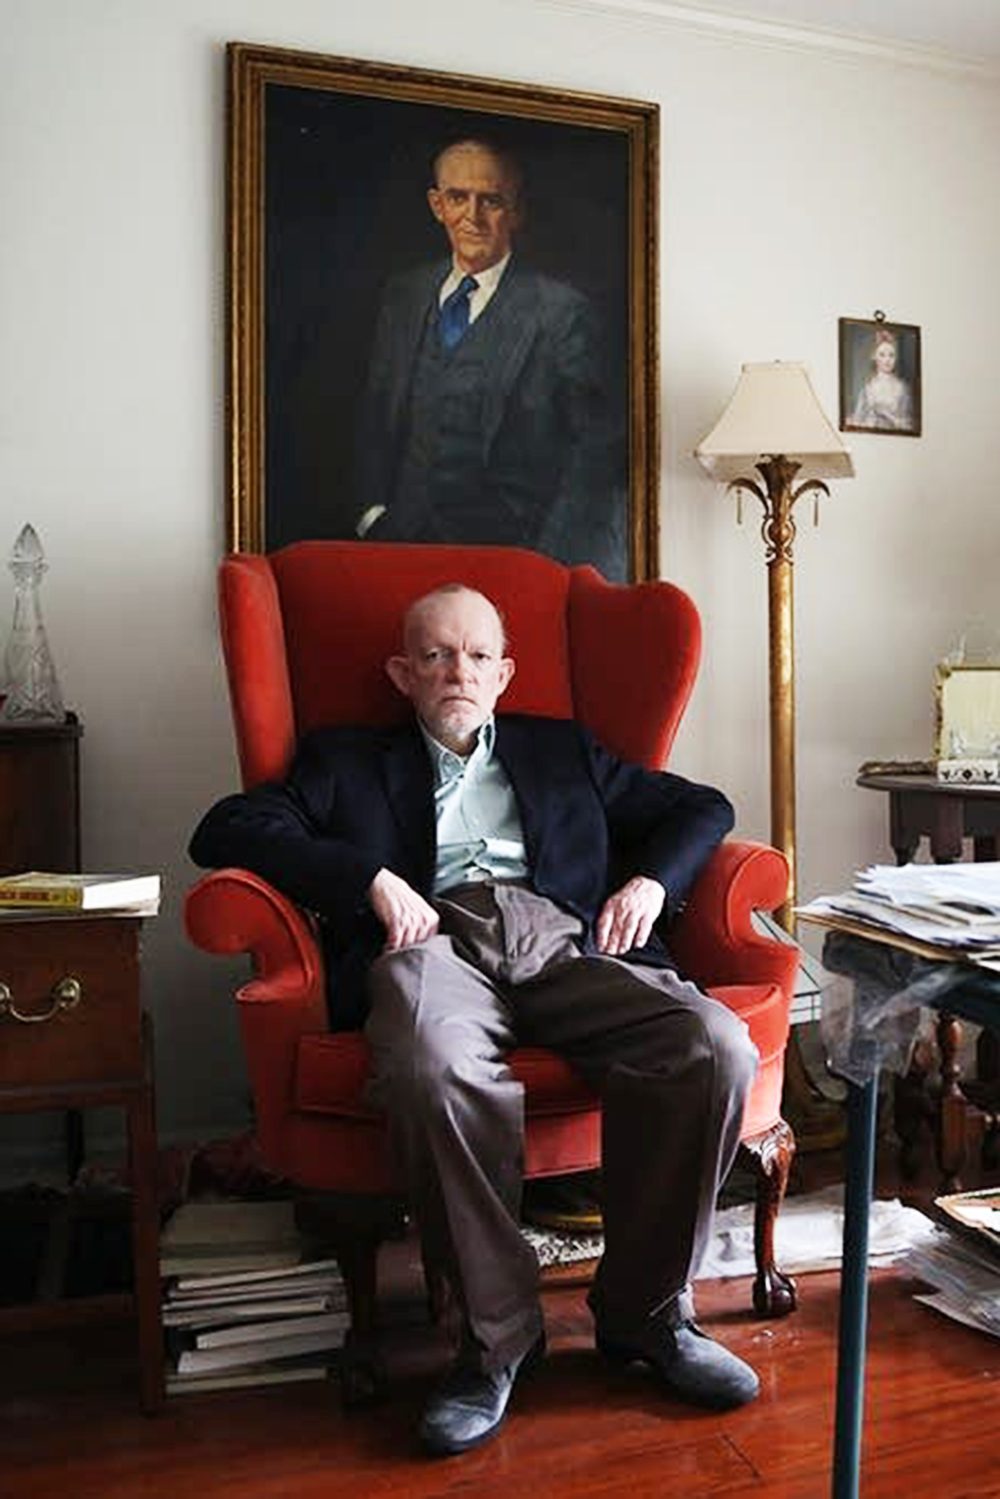 This photograph shows an older man sitting in a red armchair in a room with a large painting on the wall behind him. He is wearing a black suit and has a serious expression on his face. The room is cluttered with books and documents.